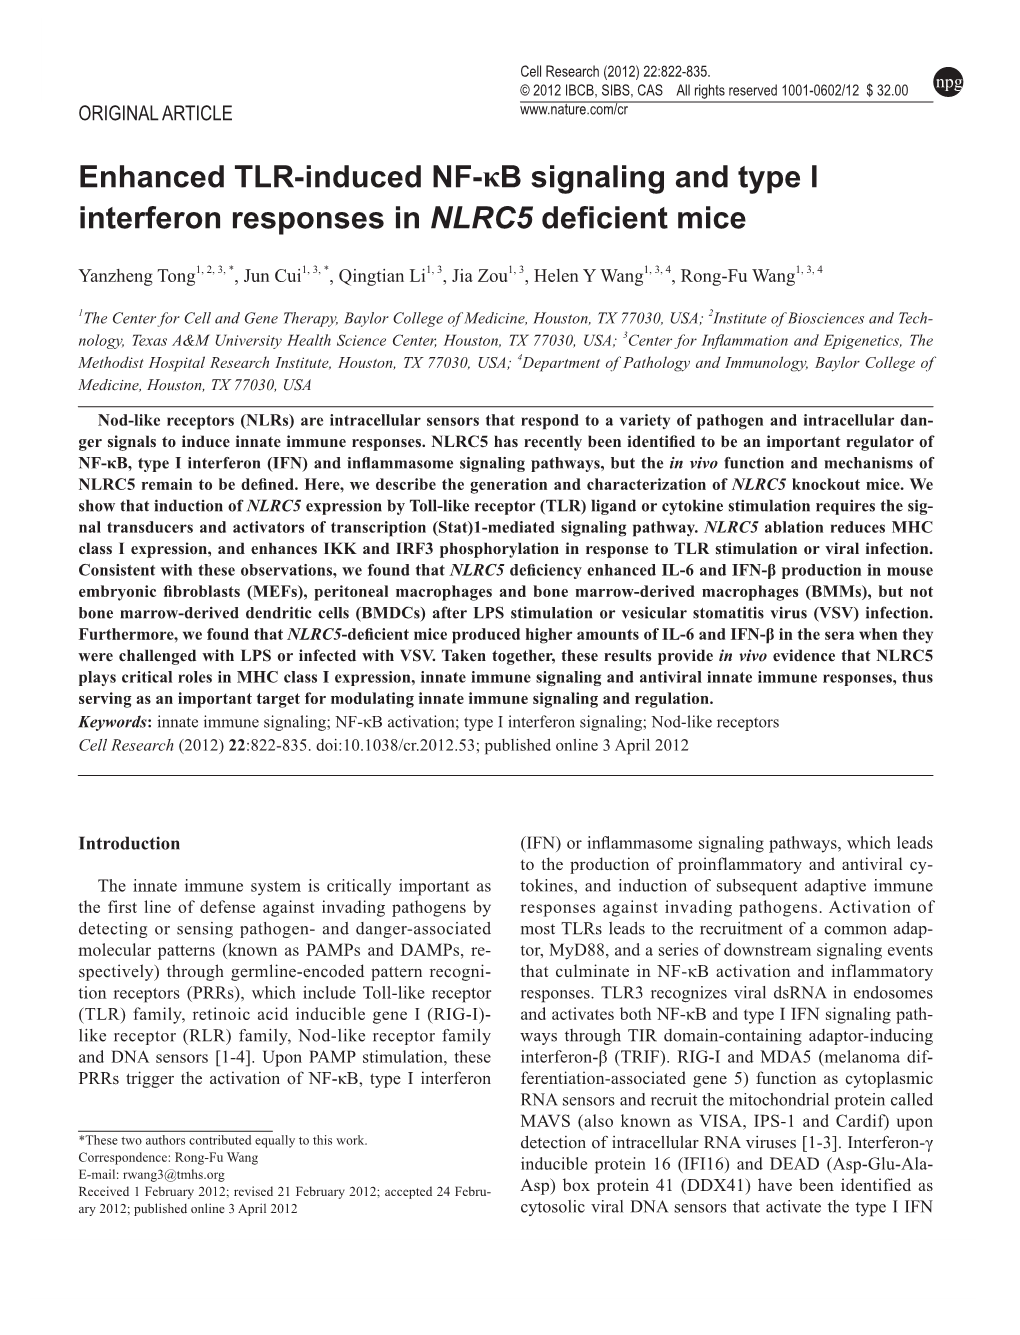 Enhanced TLR-Induced NF-Κb Signaling and Type I Interferon Responses in NLRC5 Deficient Mice